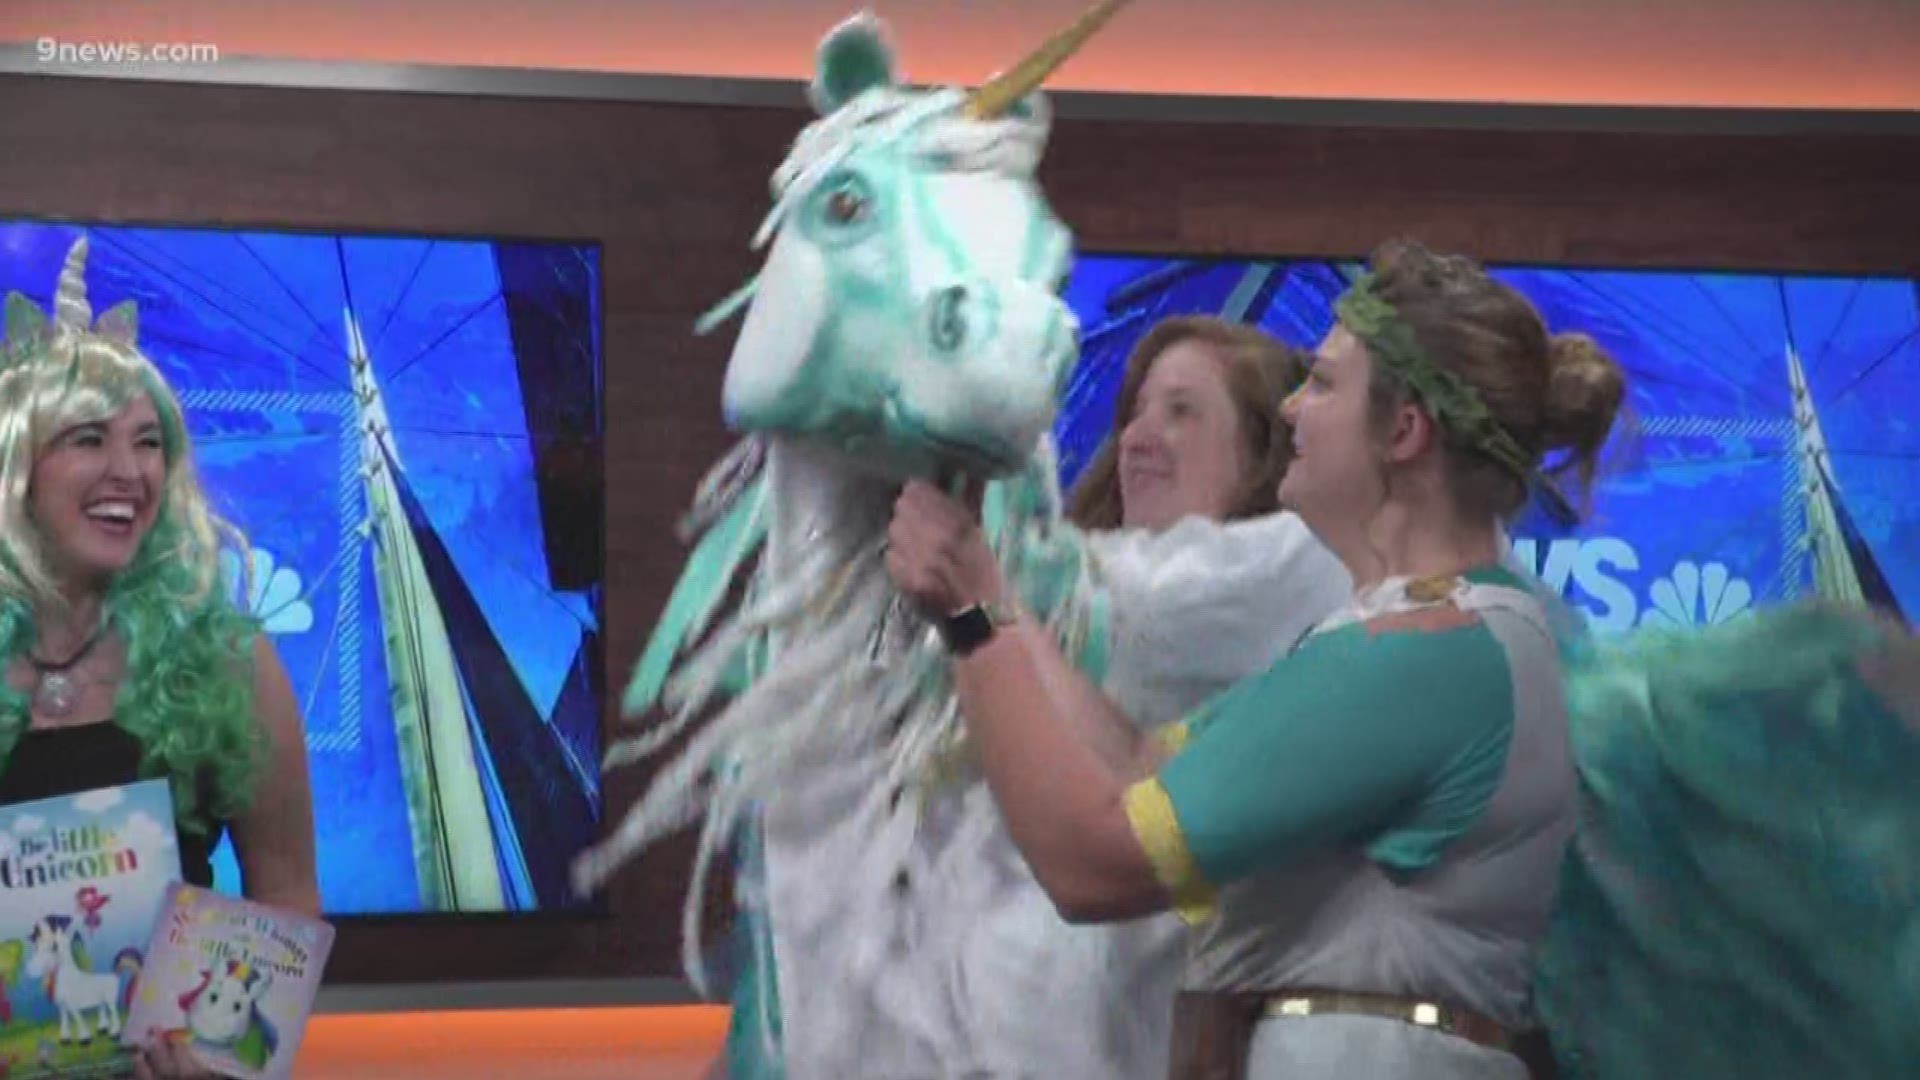 Some special guests stopped by the 9NEWS studio to tell us all about the Unicorn Festival taking place this weekend at Clement Park in Littleton.